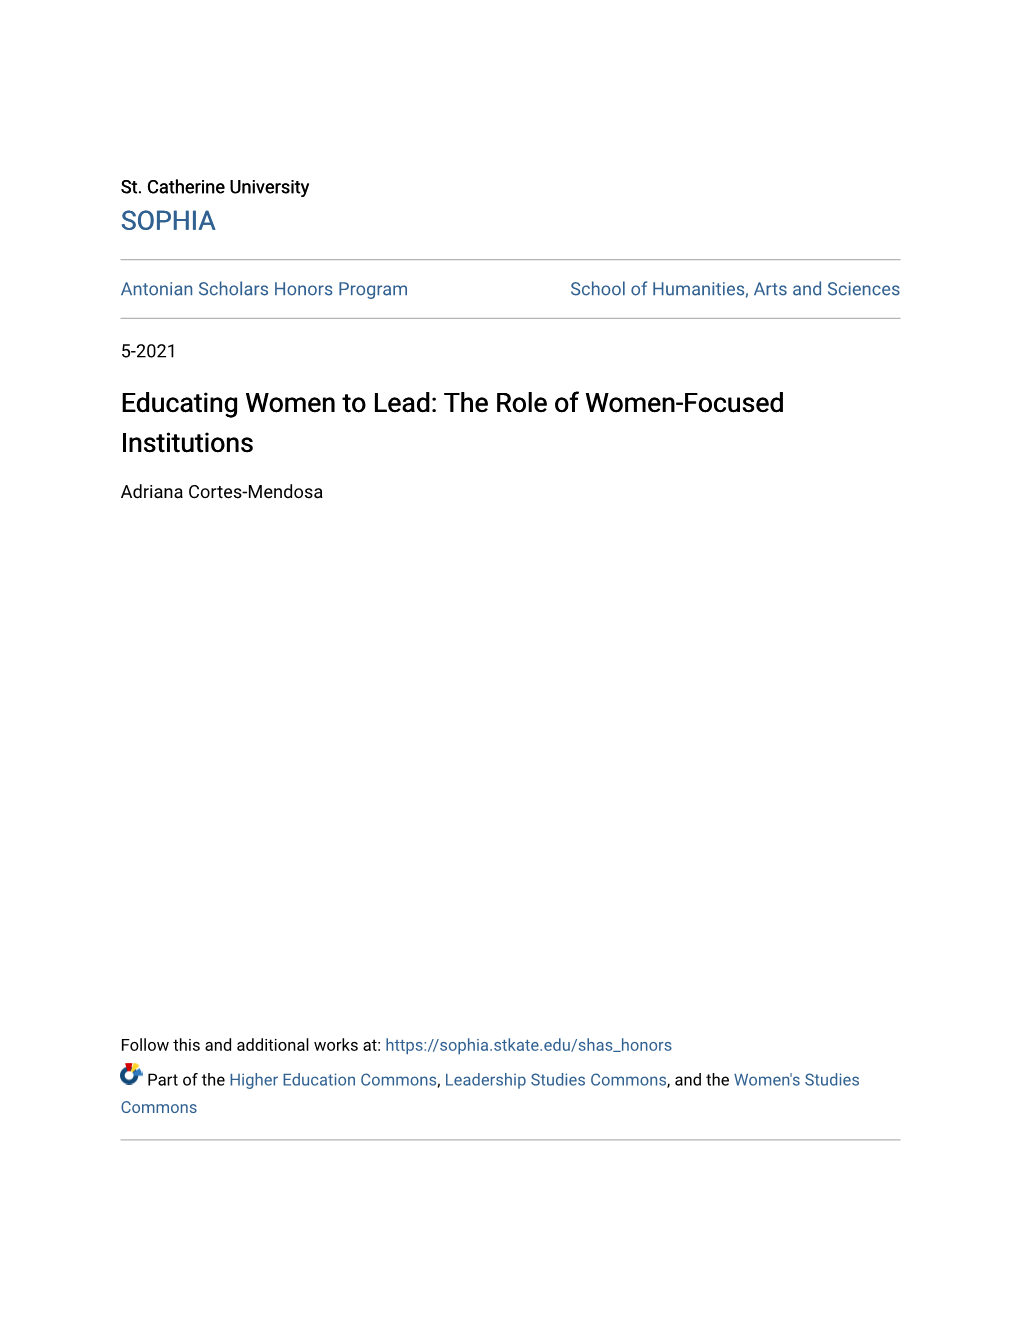 The Role of Women-Focused Institutions